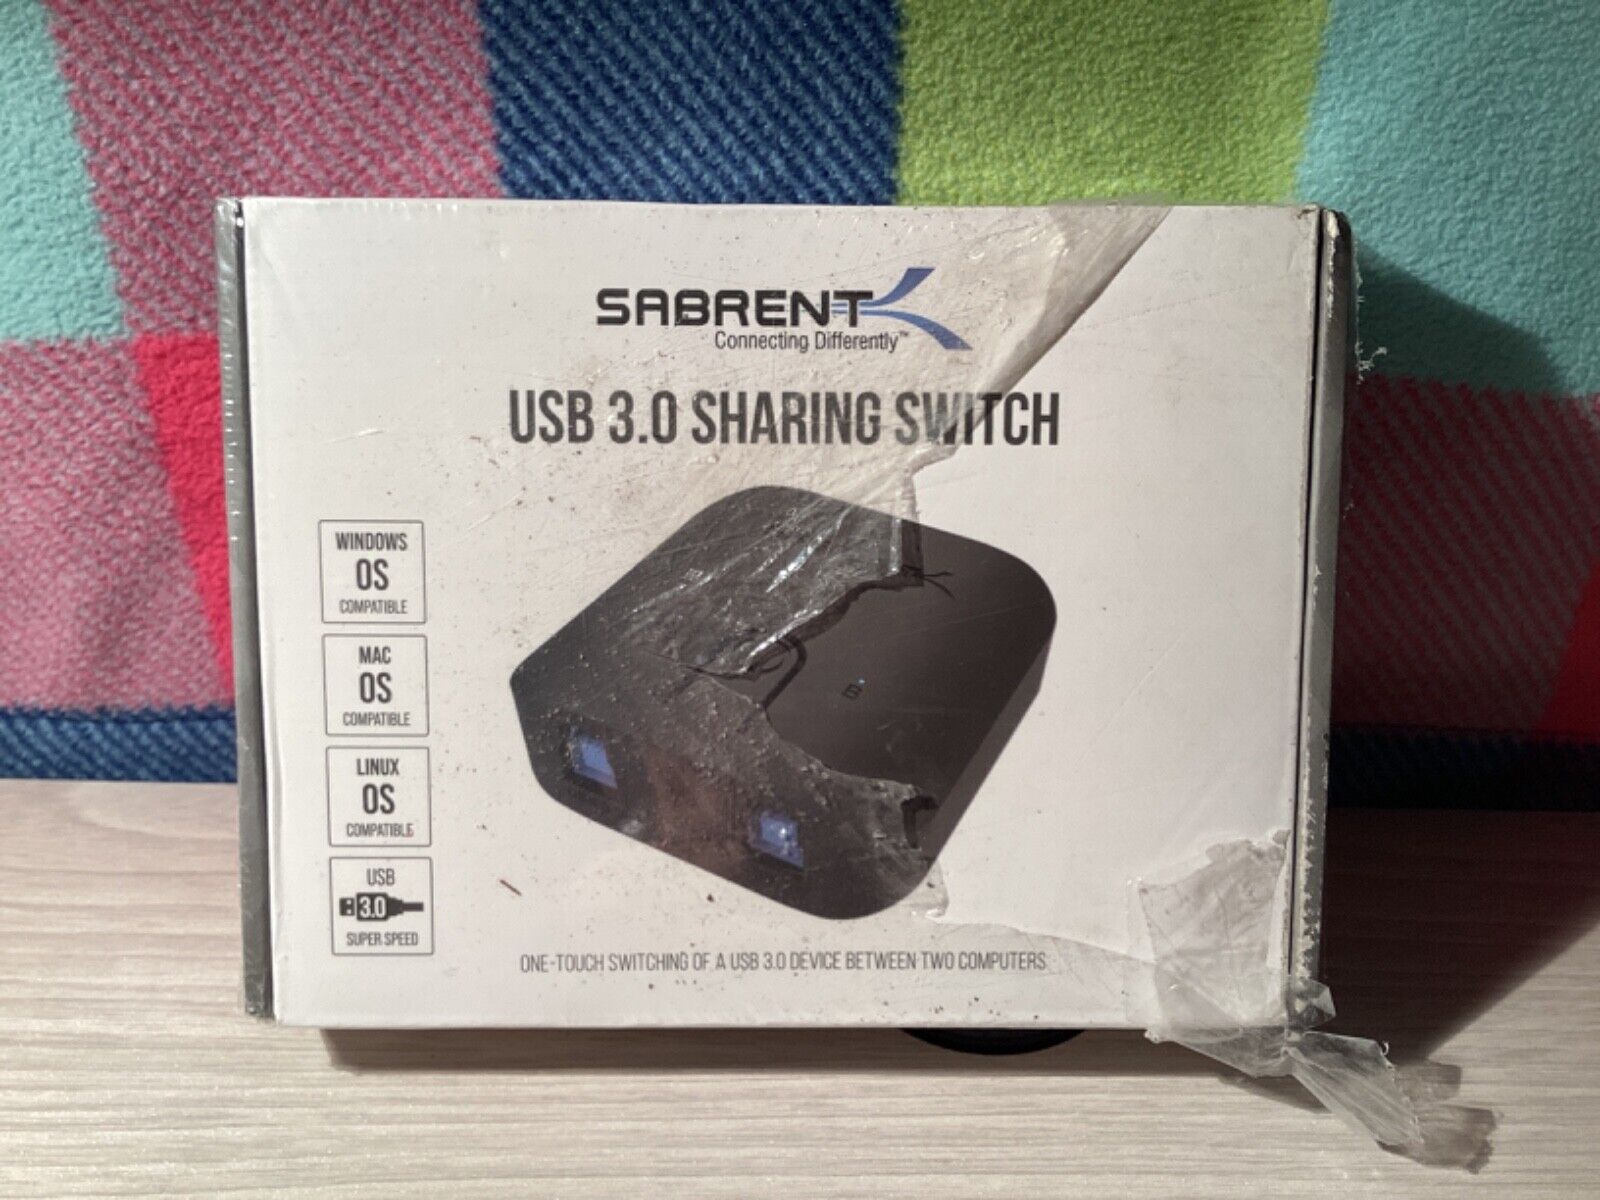 SABRENT USB 3.0 SHARING SWITCH